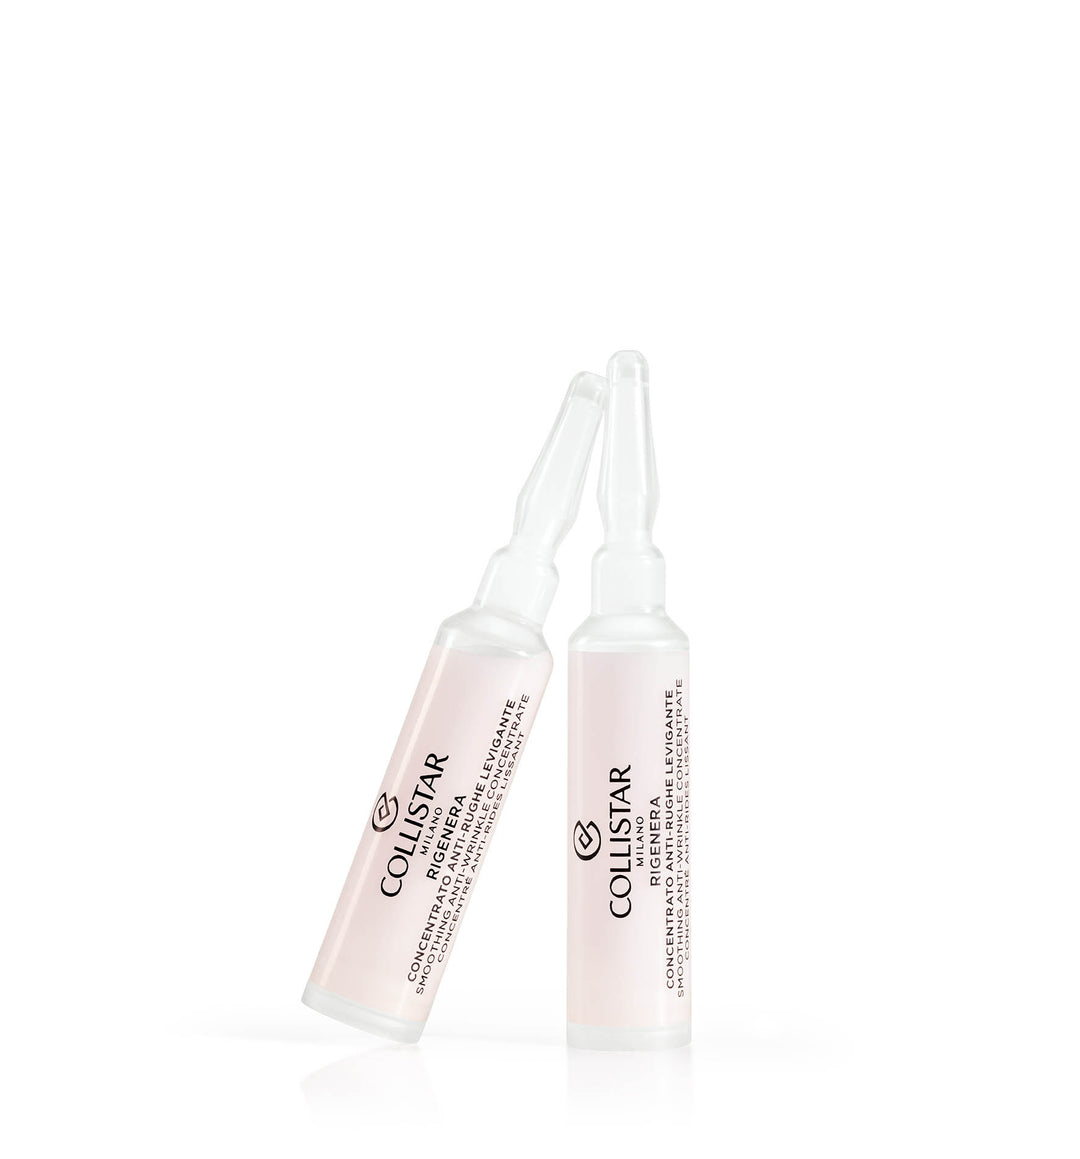 

Collistar Regenerating Smoothing Anti-Wrinkle Concentrate 2 Vials of 10 ml